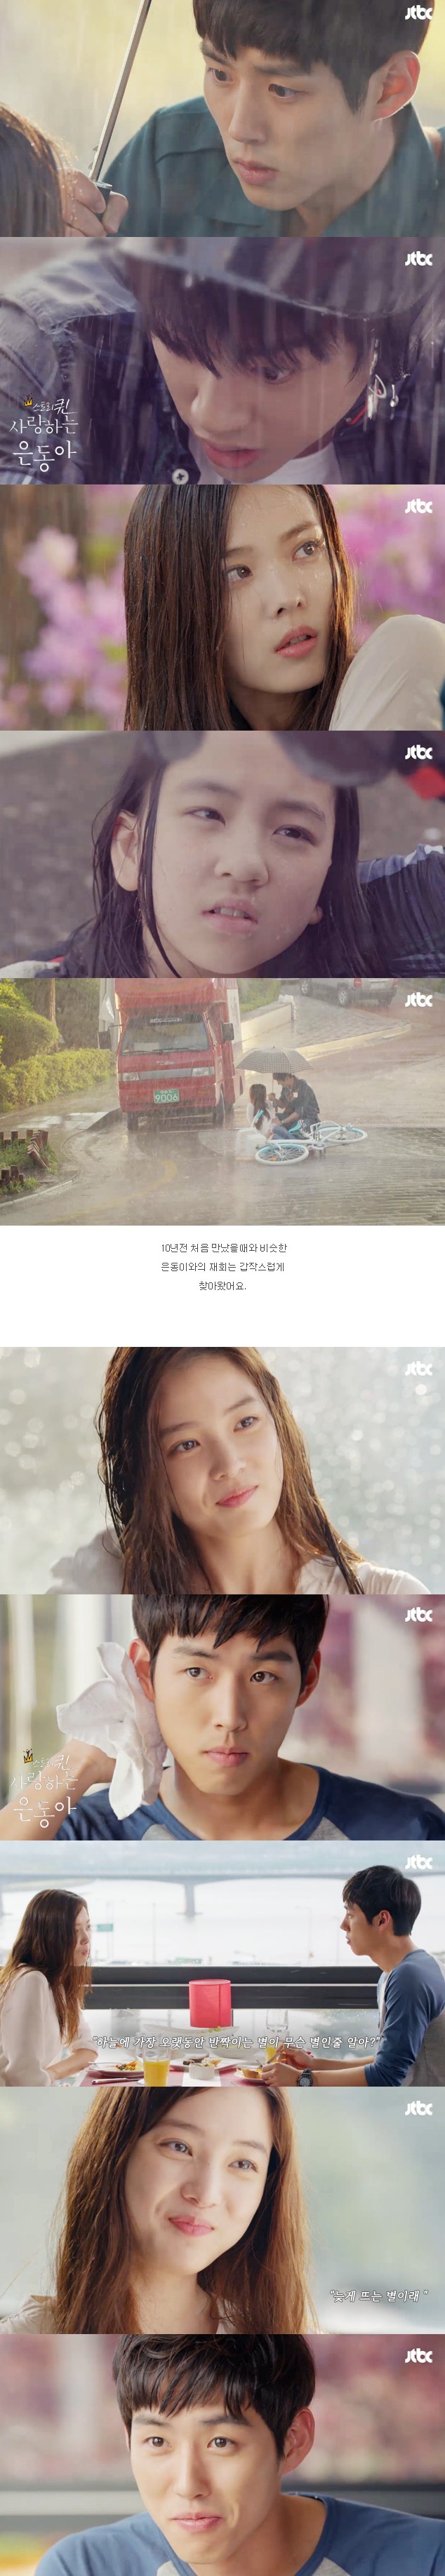 episodes 1 and 2 captures for the Korean drama 'My Love Eun-dong'